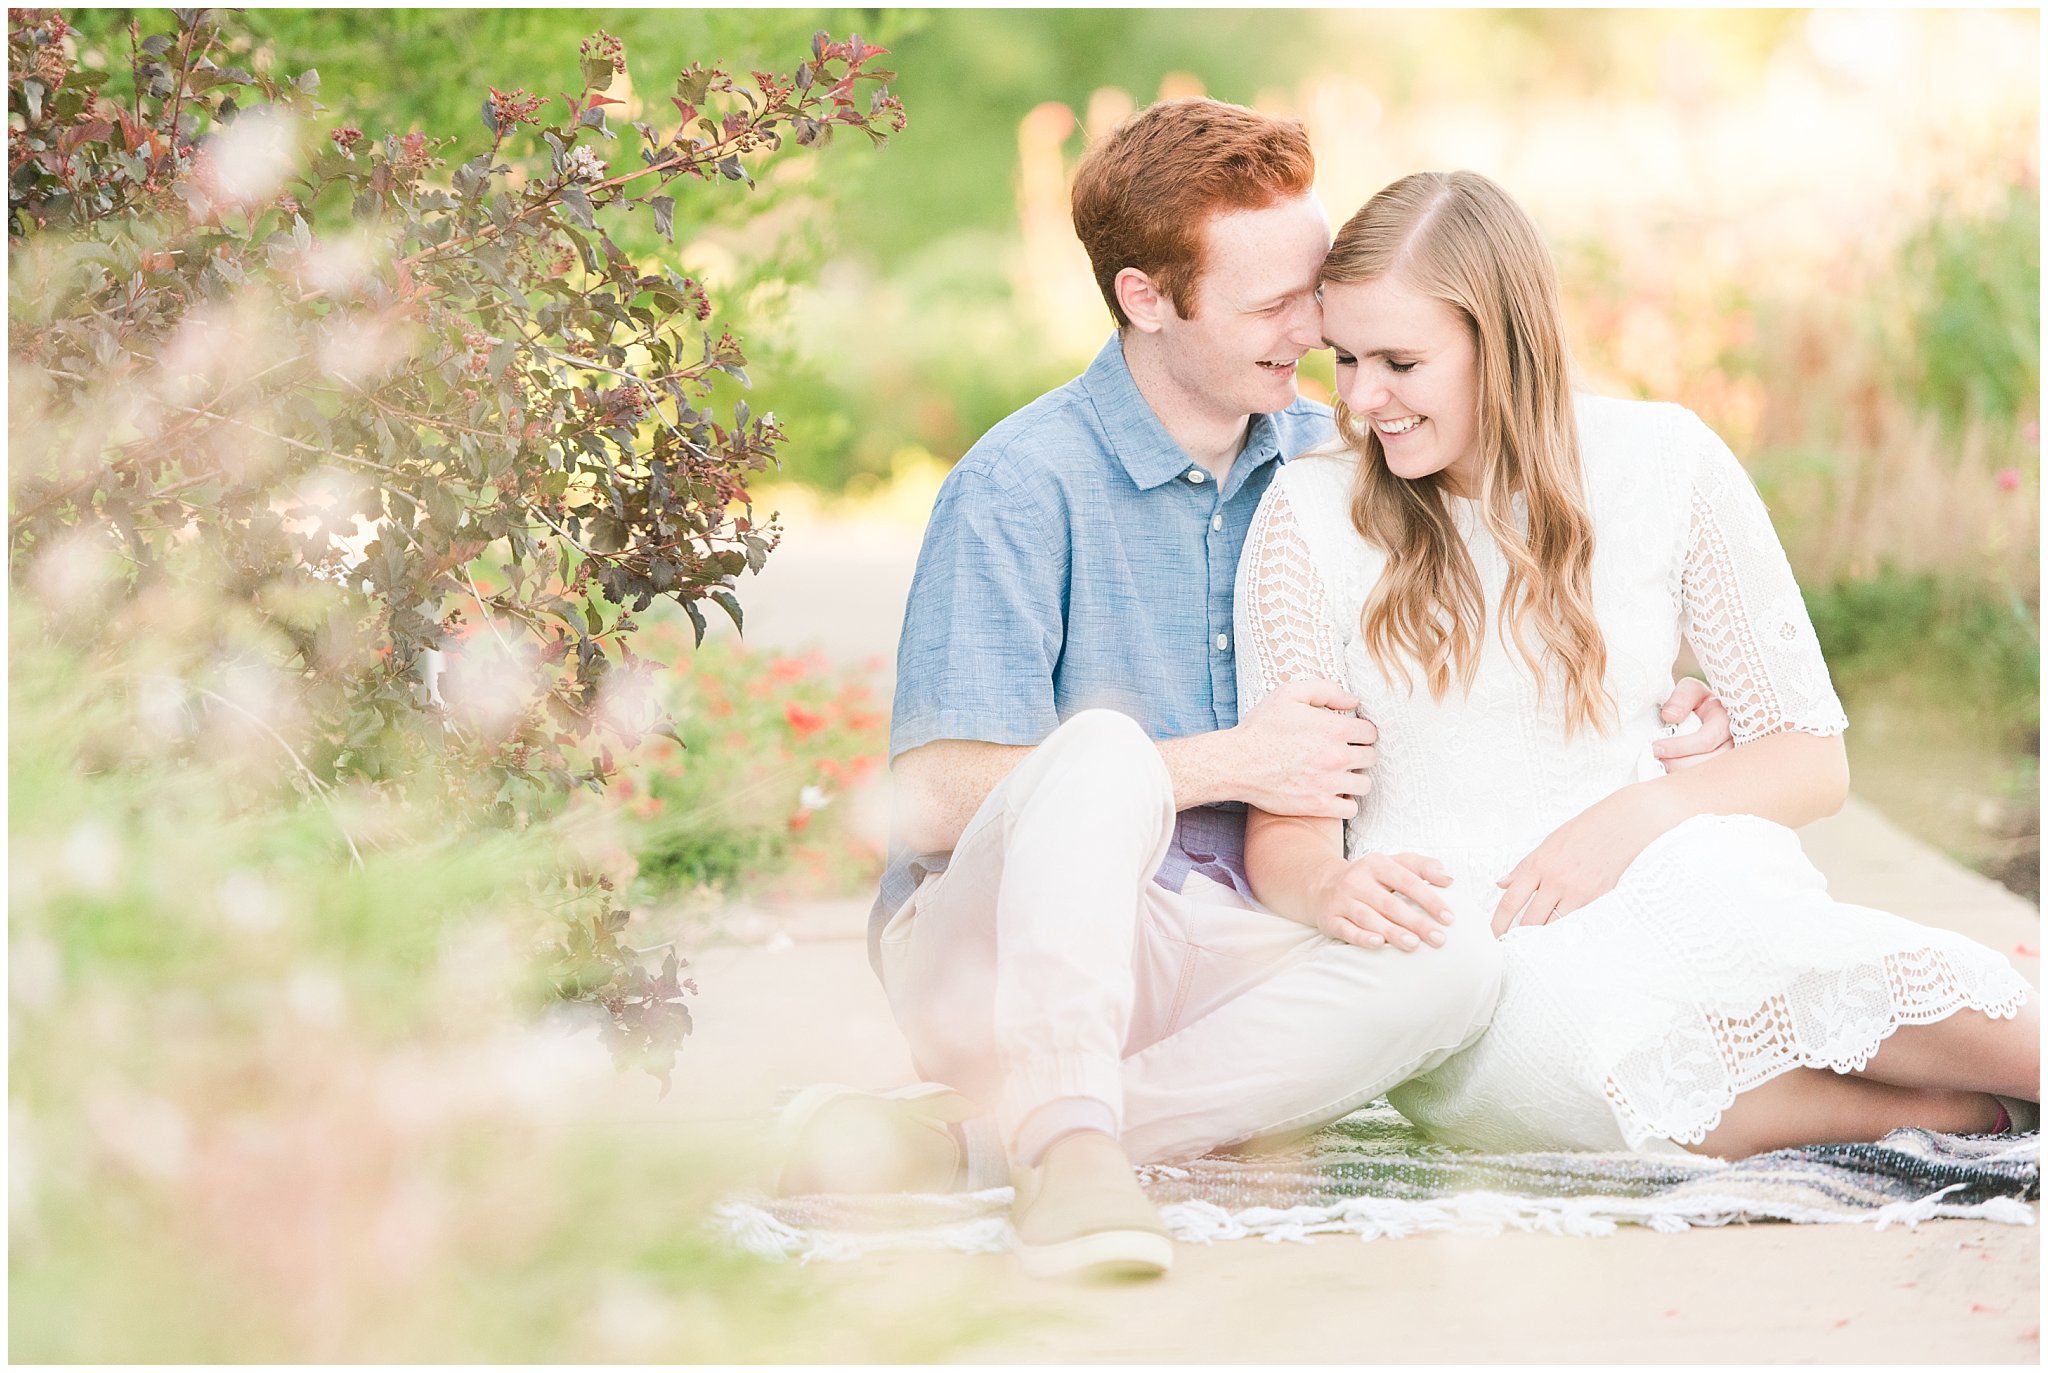 Couple sitting on a blanket during garden engagement session | Top Utah Wedding and Couples Photos 2019 | Jessie and Dallin Photography